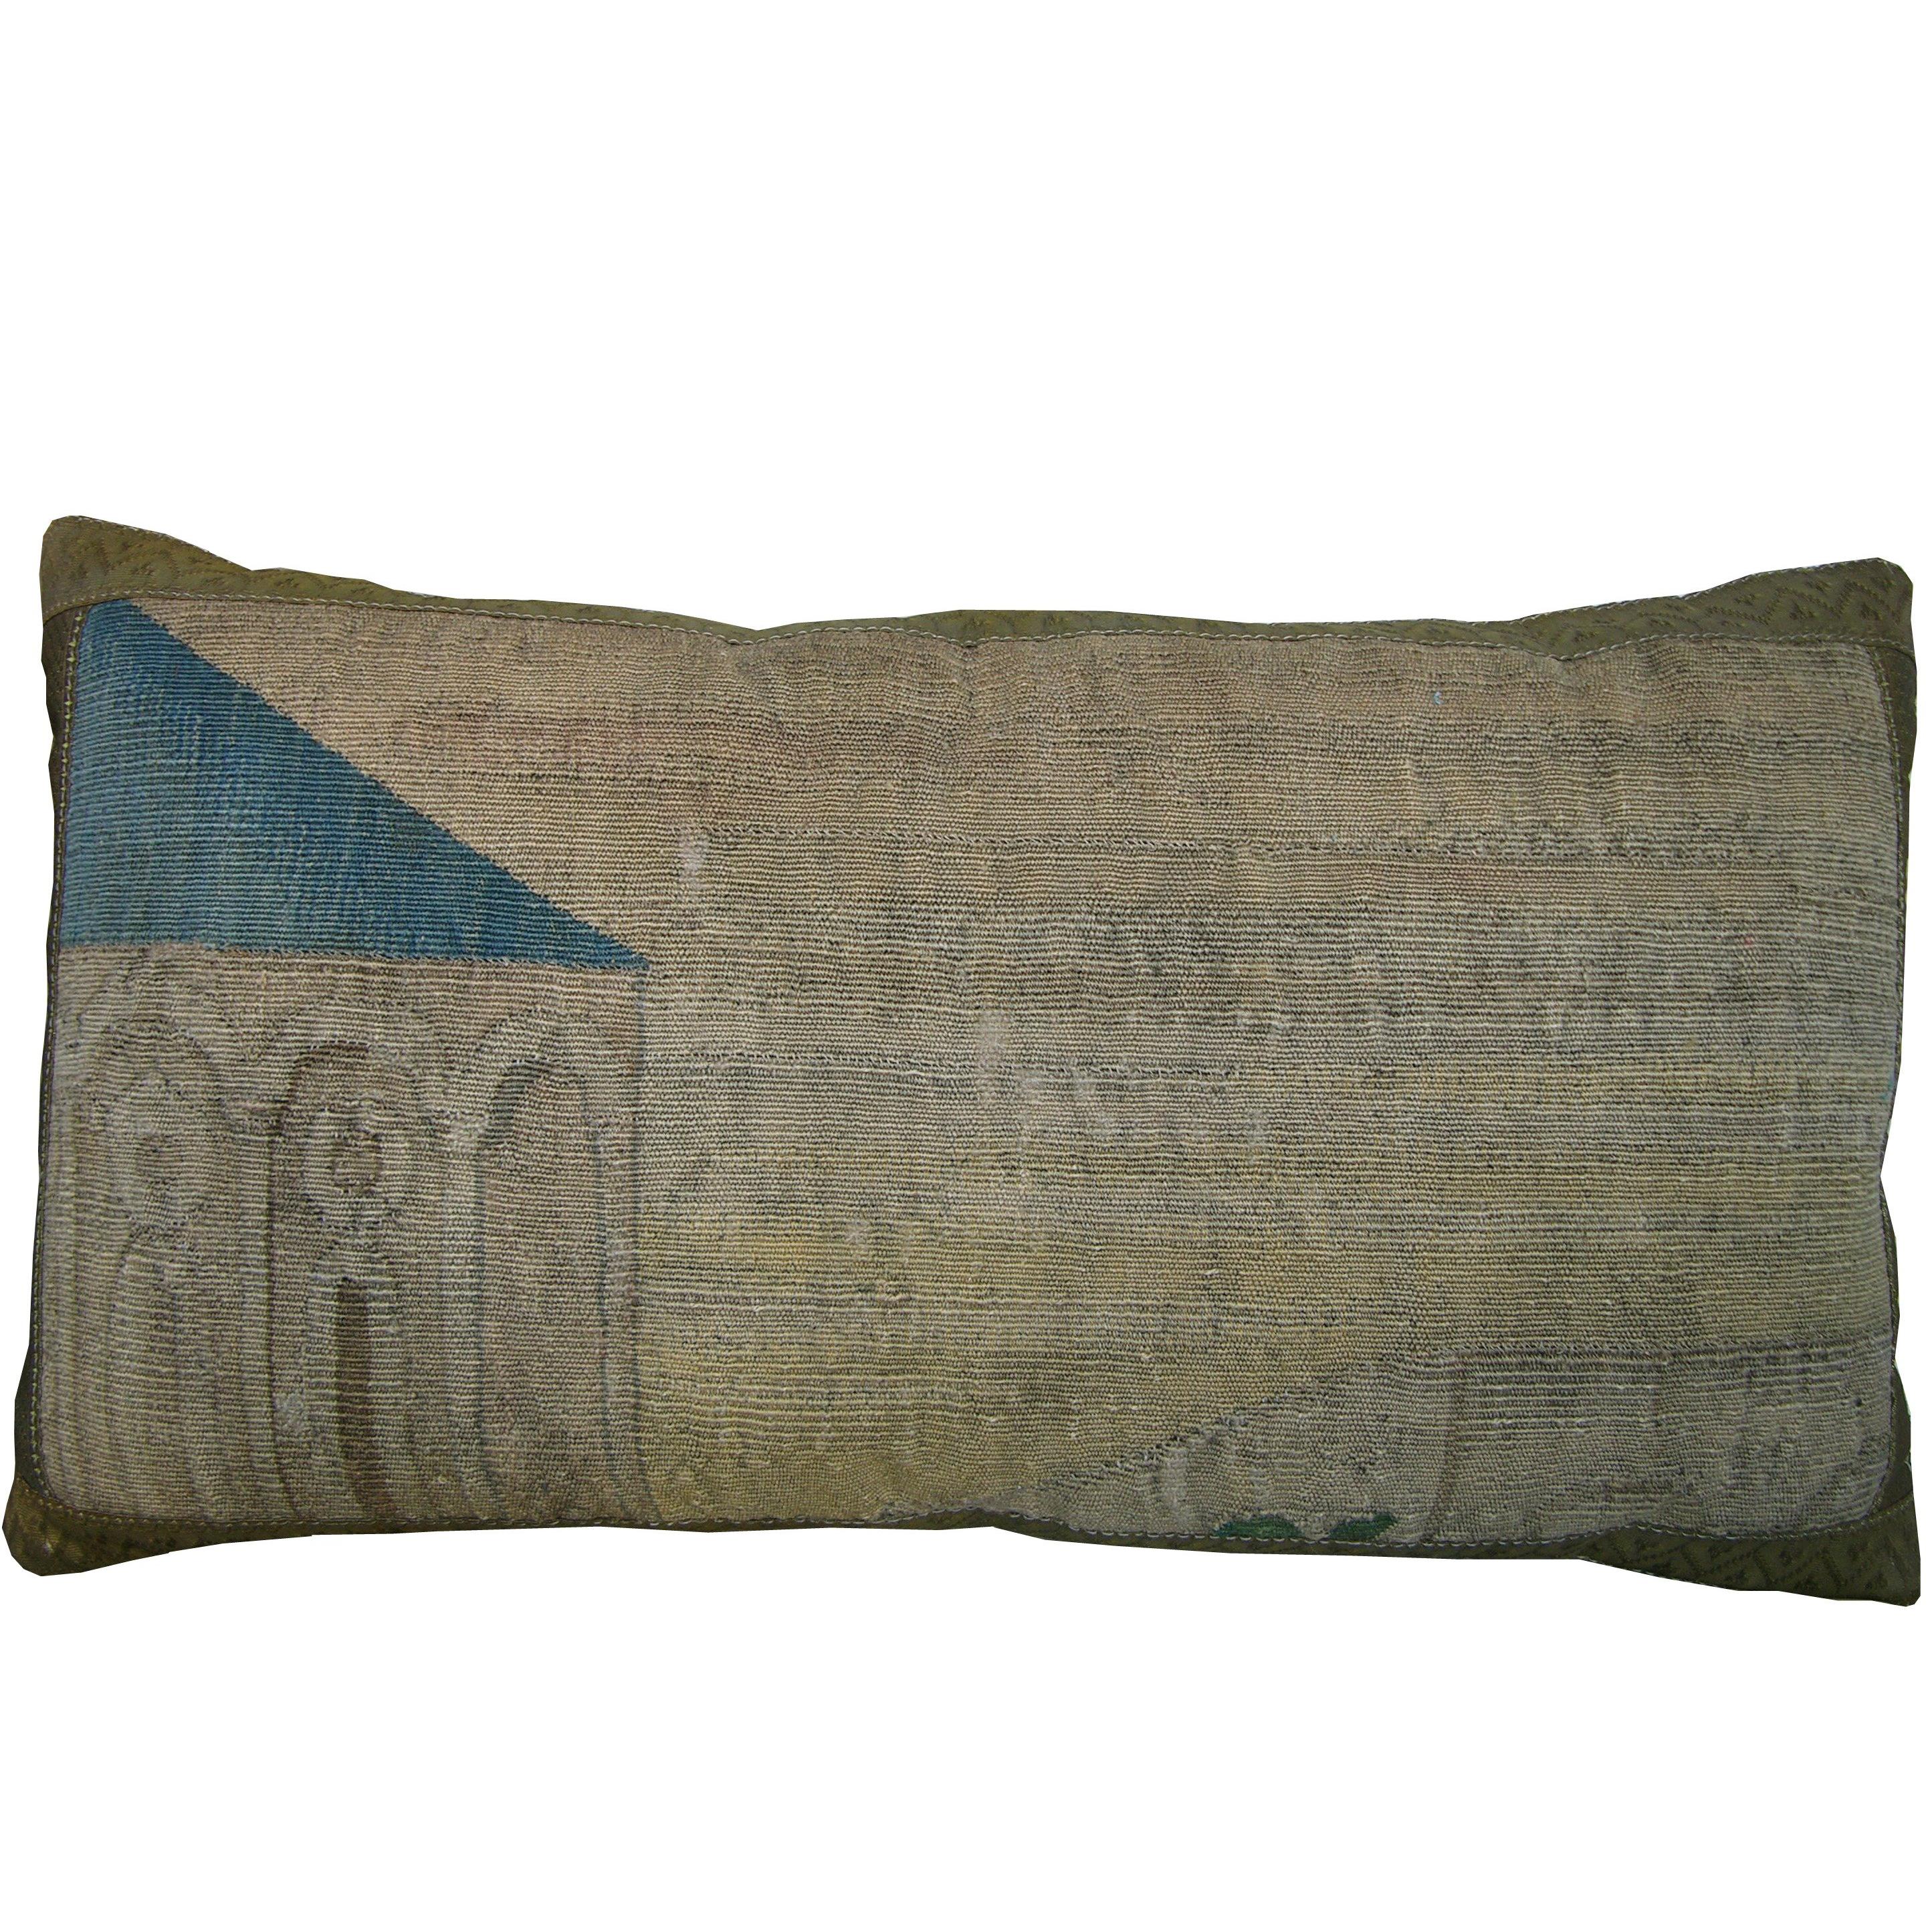 Antique Brussels Tapestry Pillow, circa 17th Century